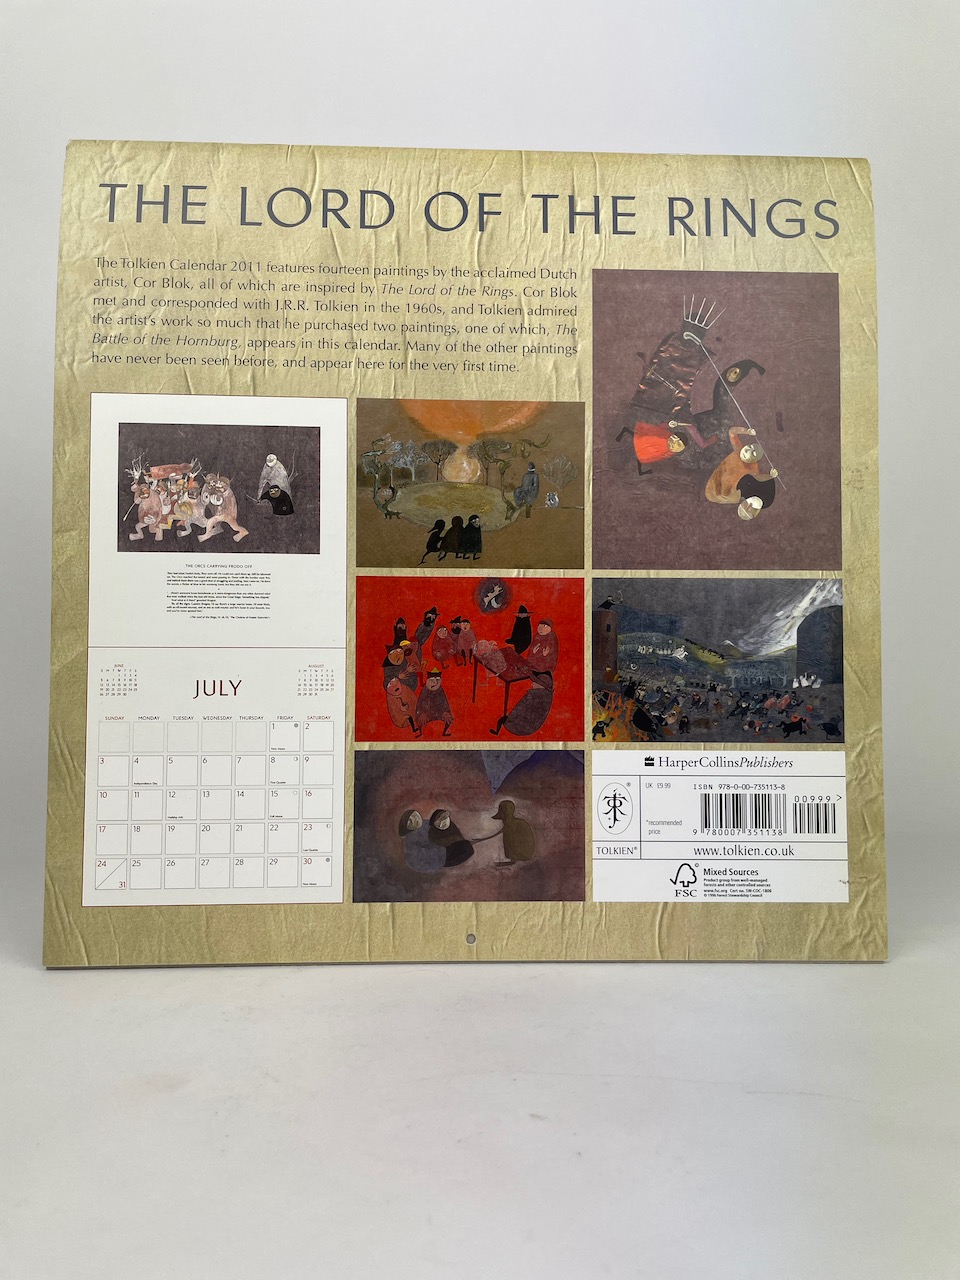 Tolkien Calendar 2011 features 13 paintings by the artist Cor Blok - signed 2